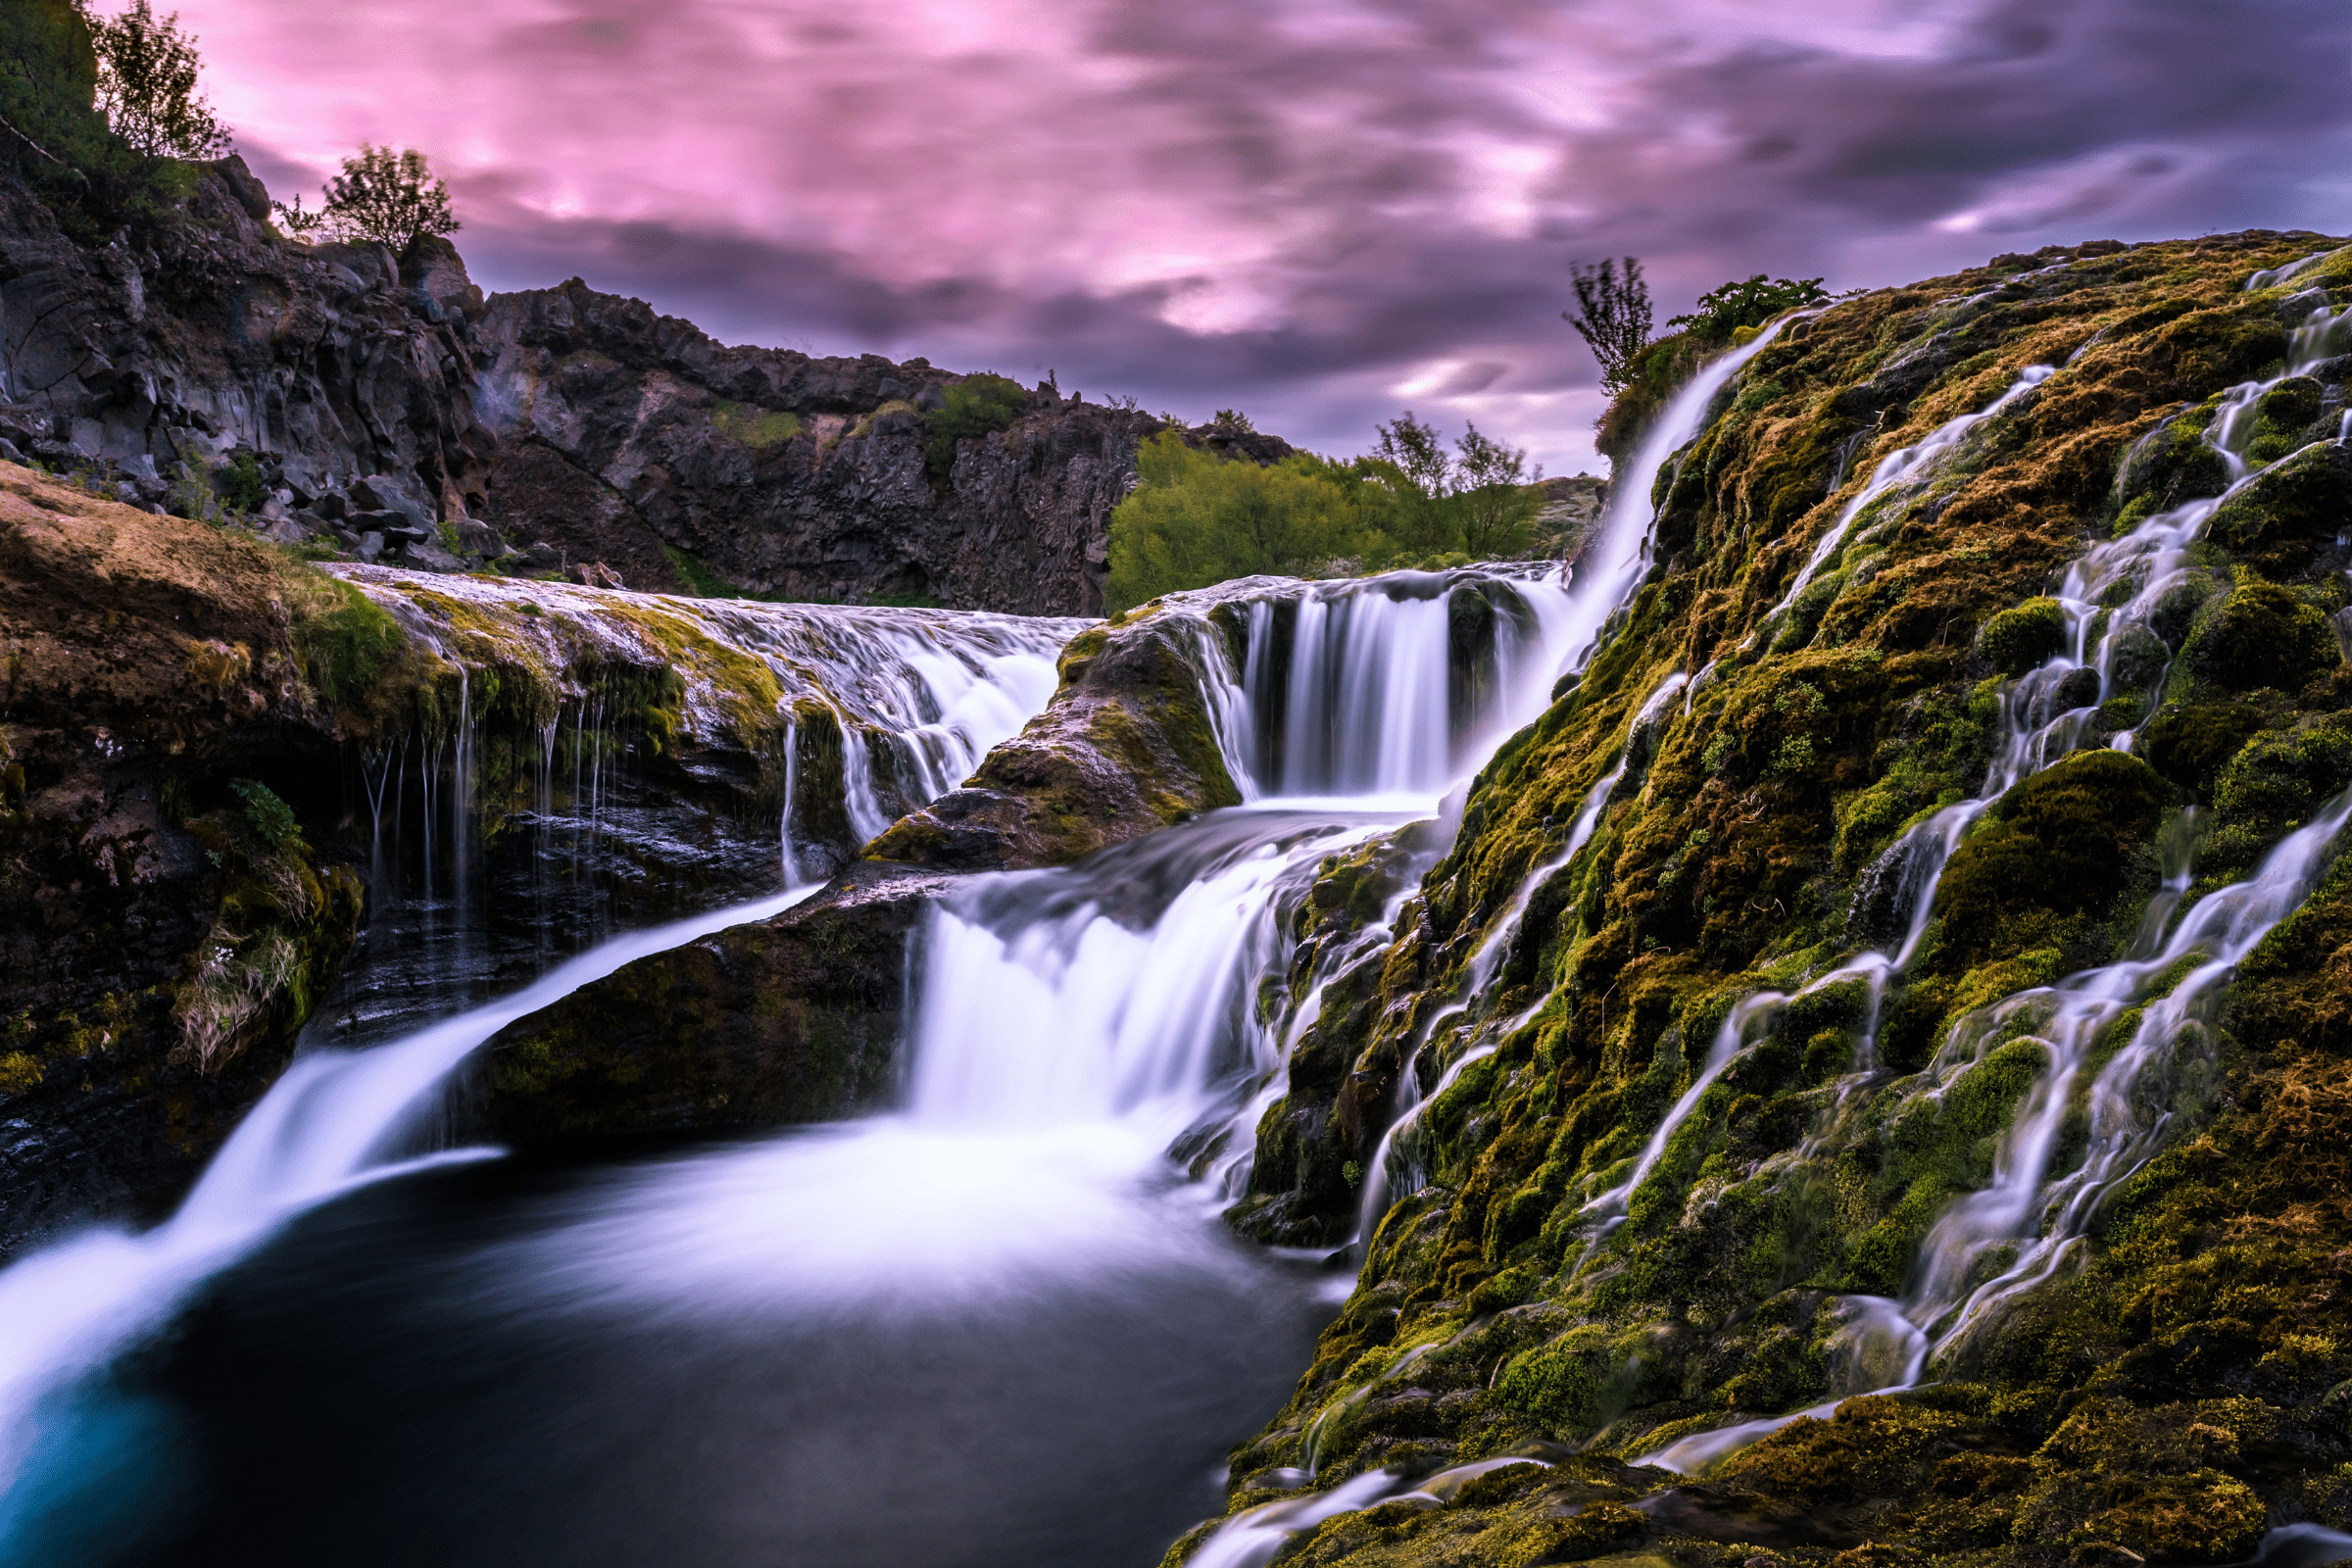 Gjain Waterfall and Canyon in South Iceland under pink skies.